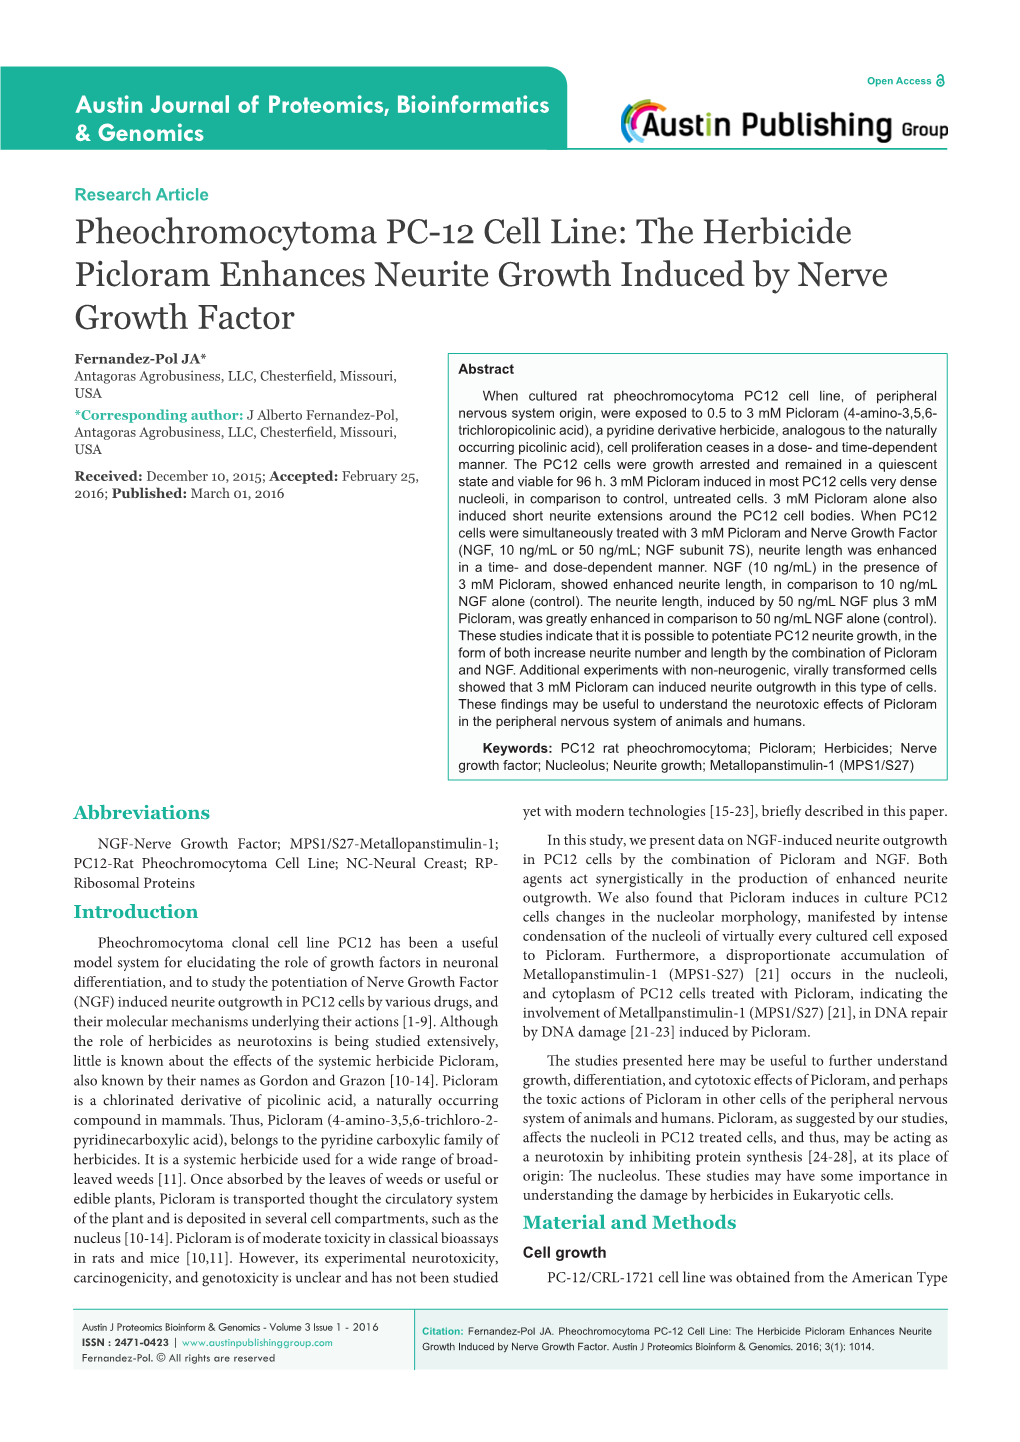 Pheochromocytoma PC-12 Cell Line: the Herbicide Picloram Enhances Neurite Growth Induced by Nerve Growth Factor